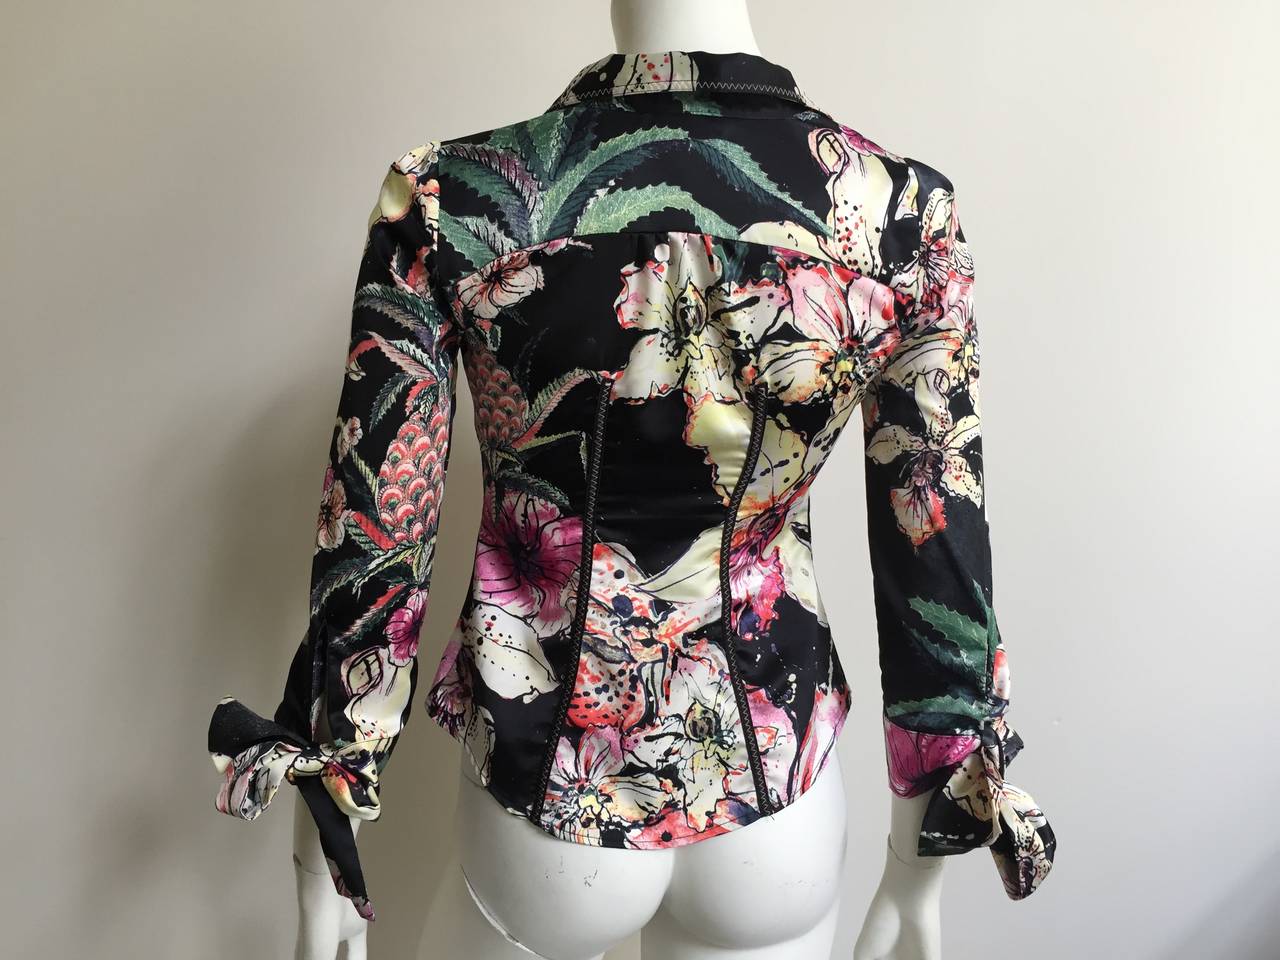 Women's Just Cavalli Floral Stretch Blouse Size Small.